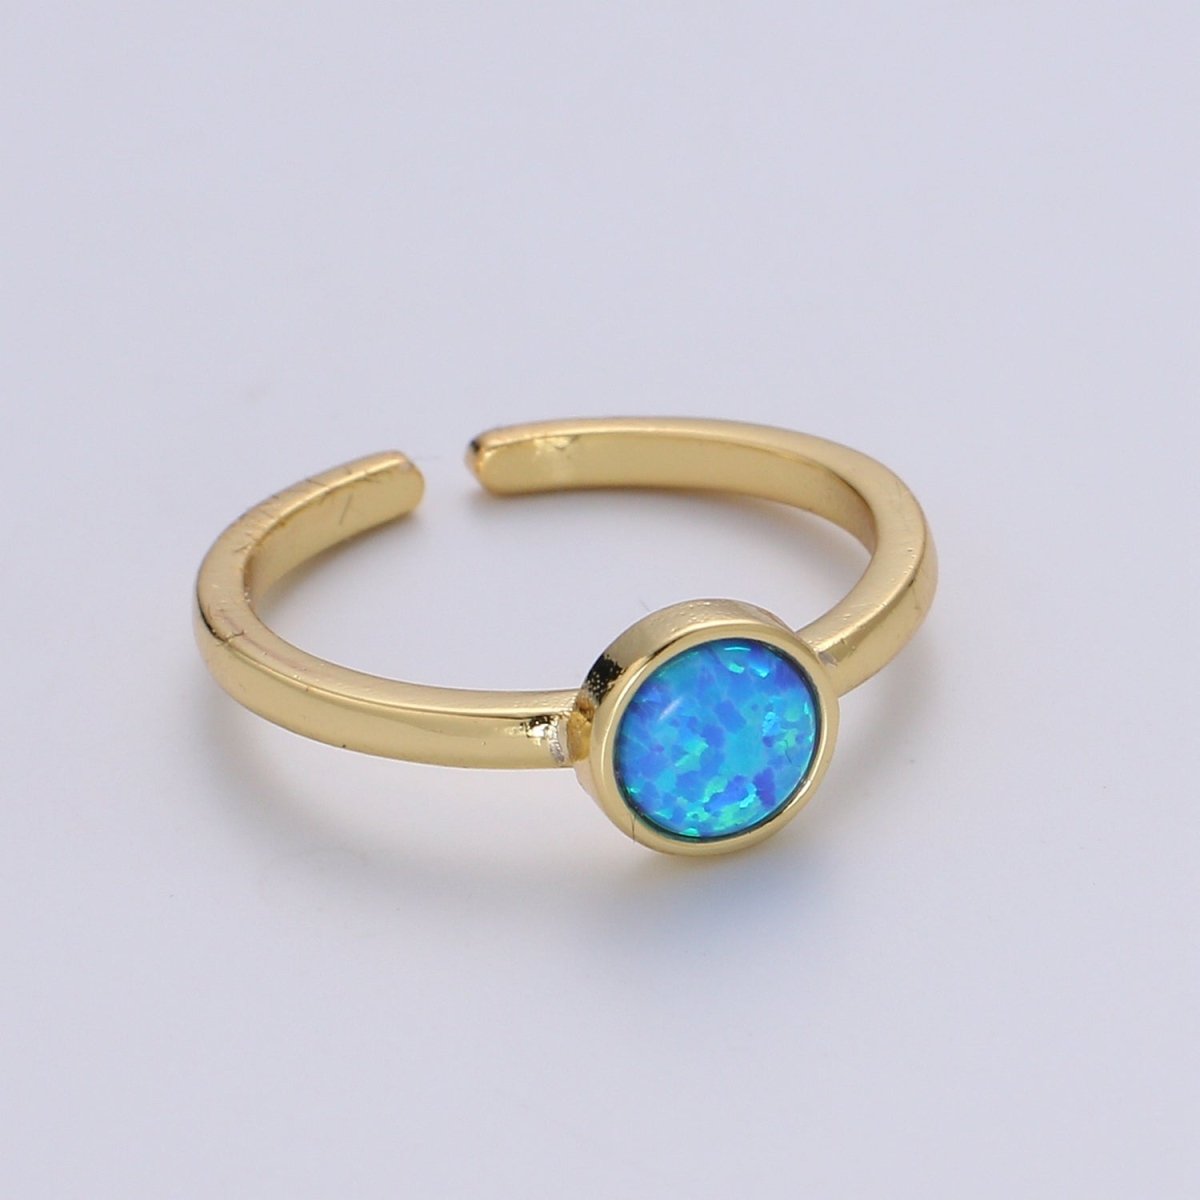 1pc 24K Gold Opal Ring,Round Opal Ring, Solitaire White Opal Circle Design Gold Open Adjustable Band Jewelry Ring R536 - DLUXCA